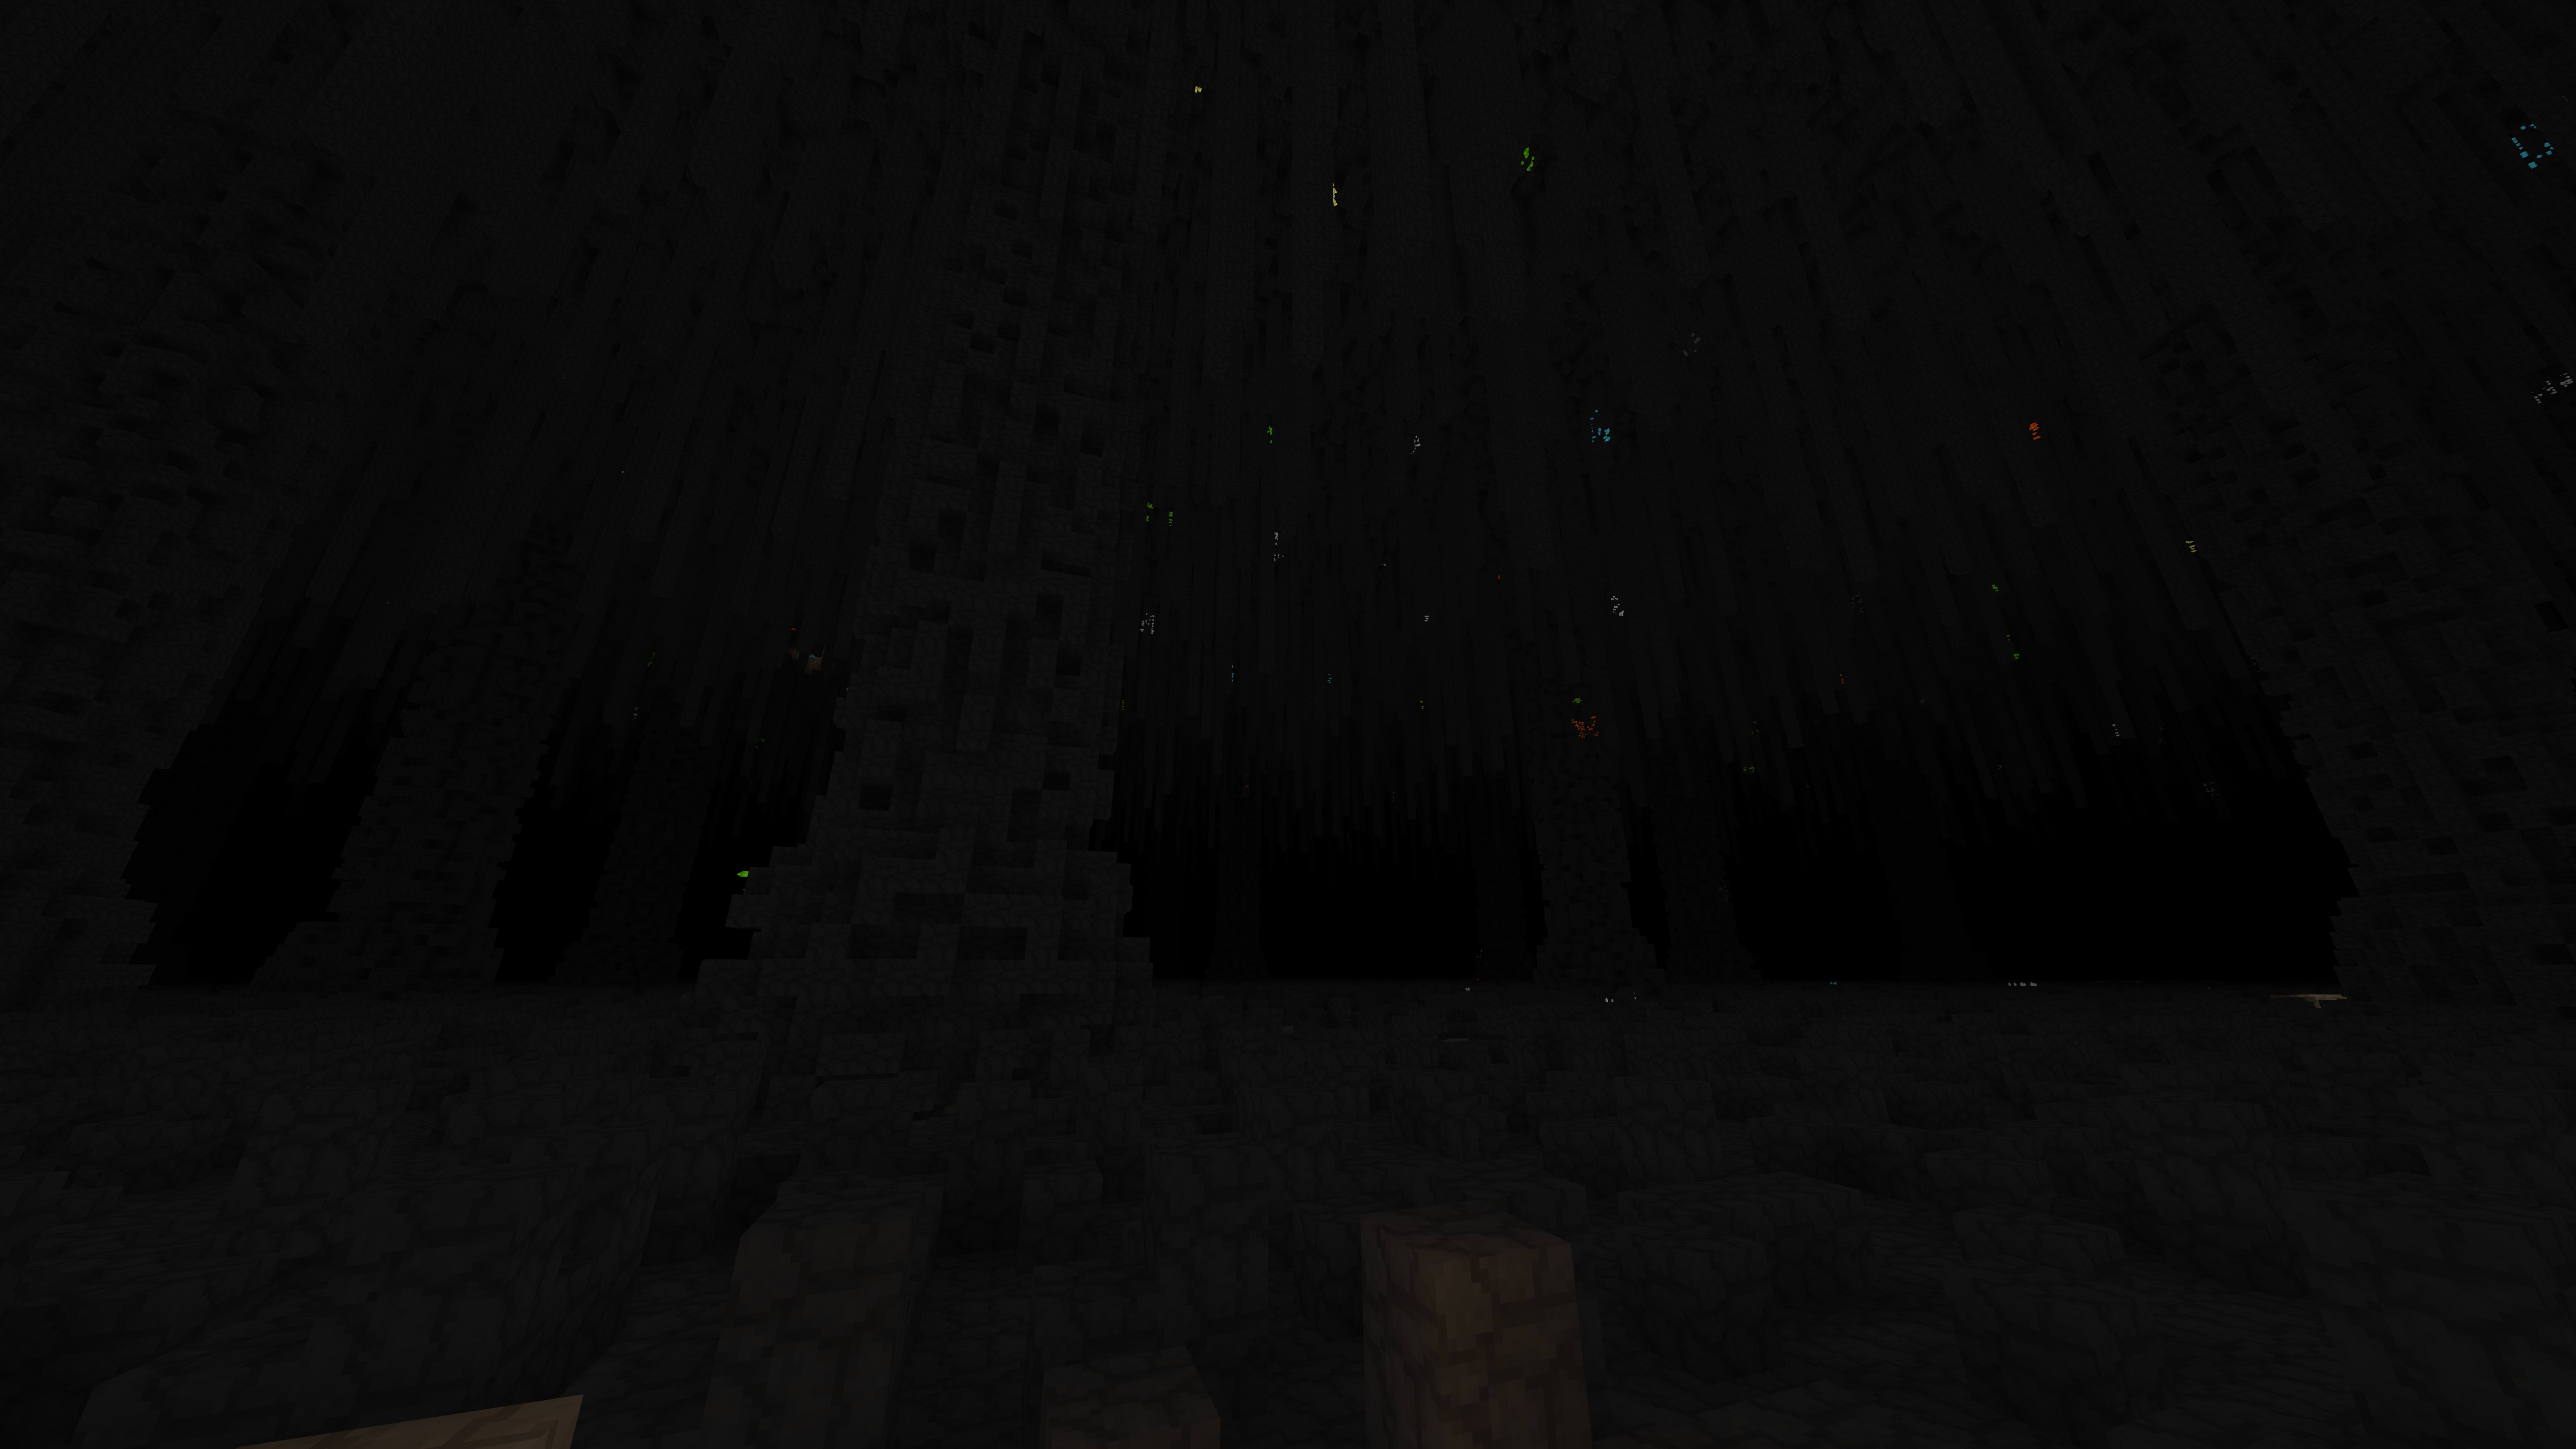 The Deep Dark with Thaumcraft looks amazing, have 2 8k Wallpaper of it